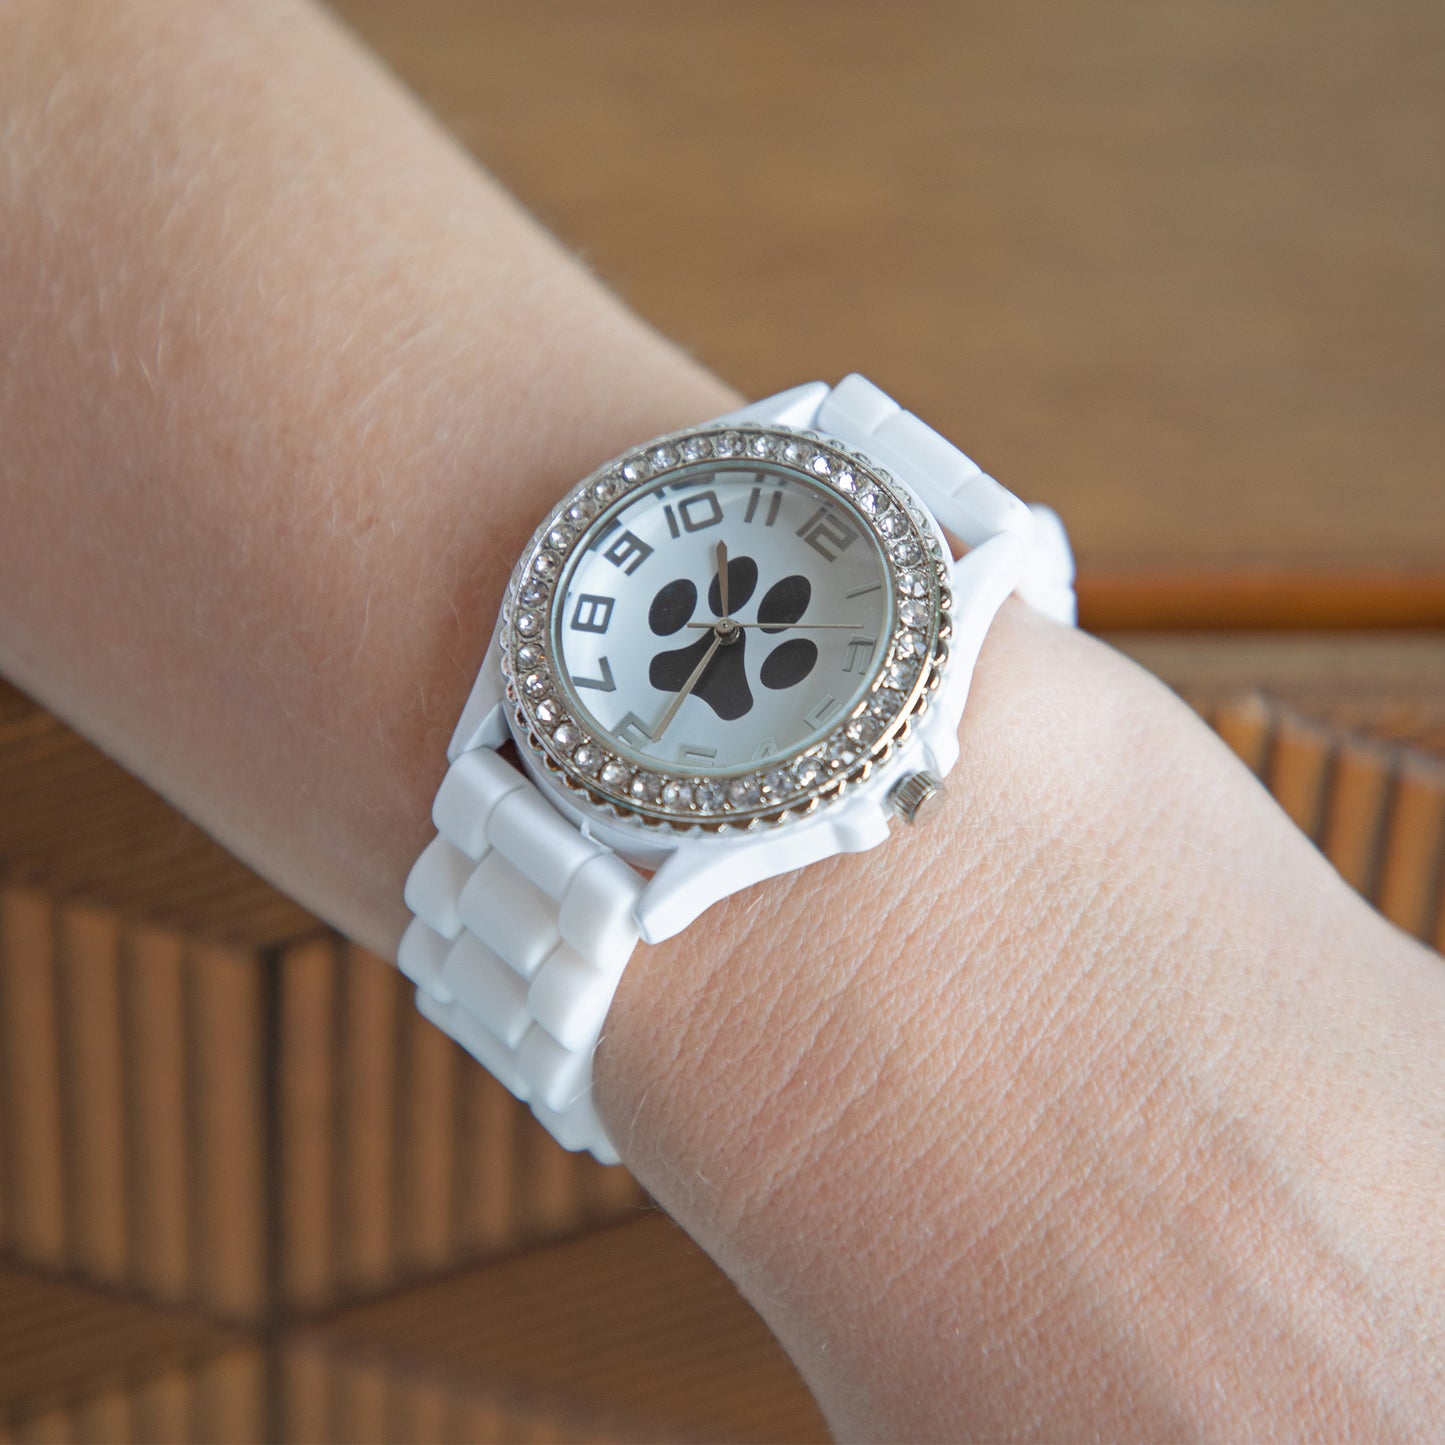 Paw Print Silicone Watch